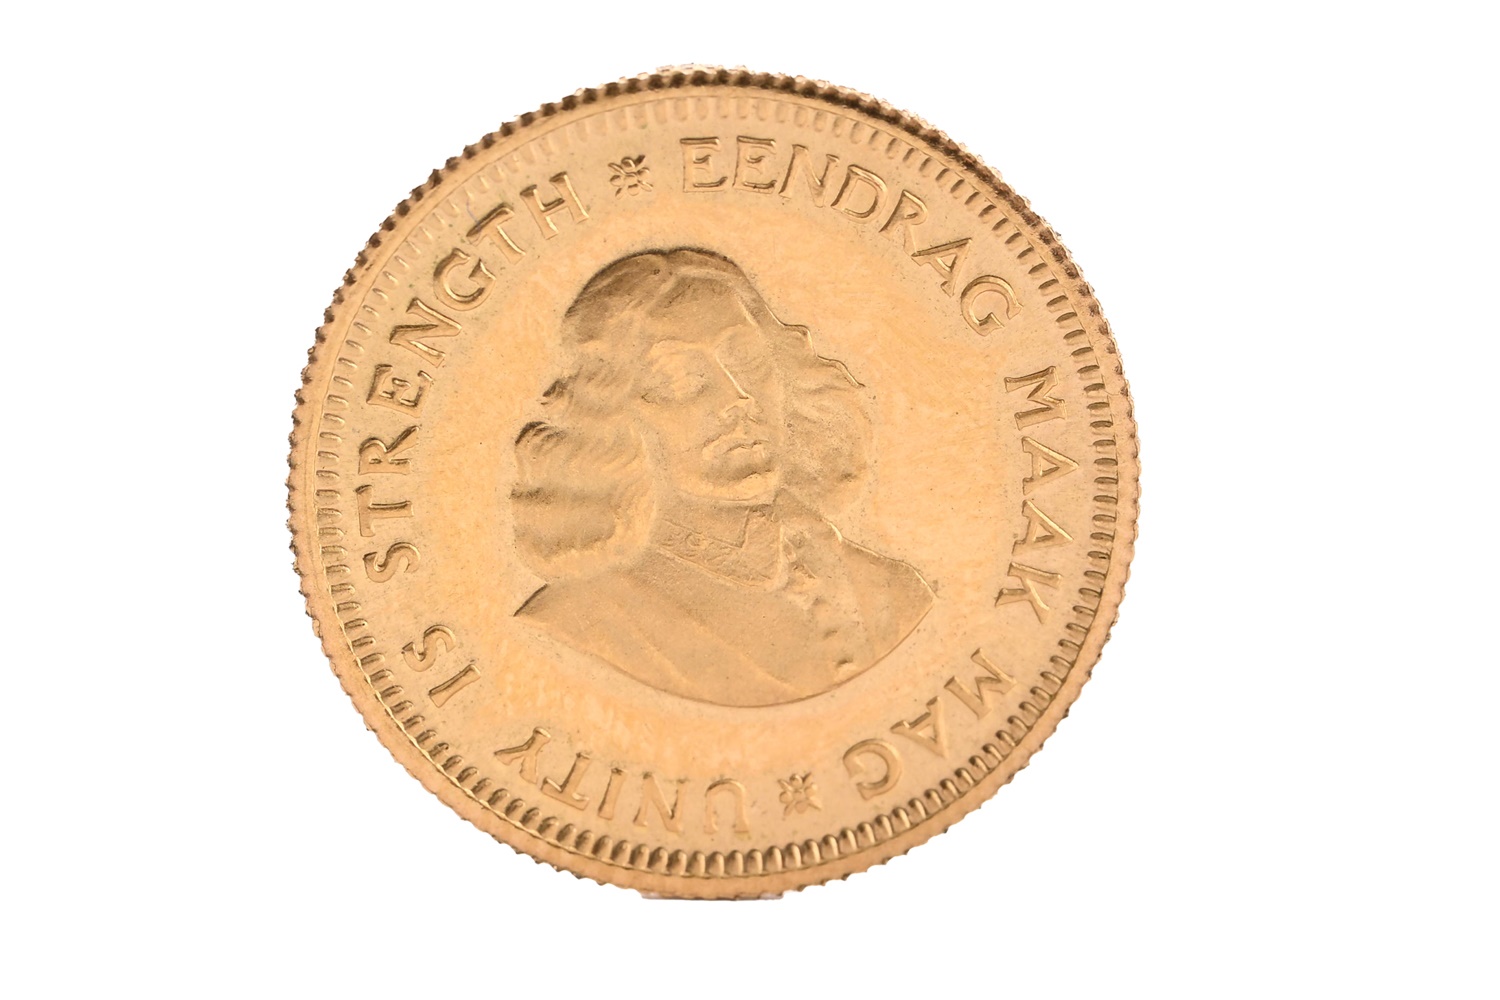 GOLD 1 RAND COIN, - Image 2 of 2